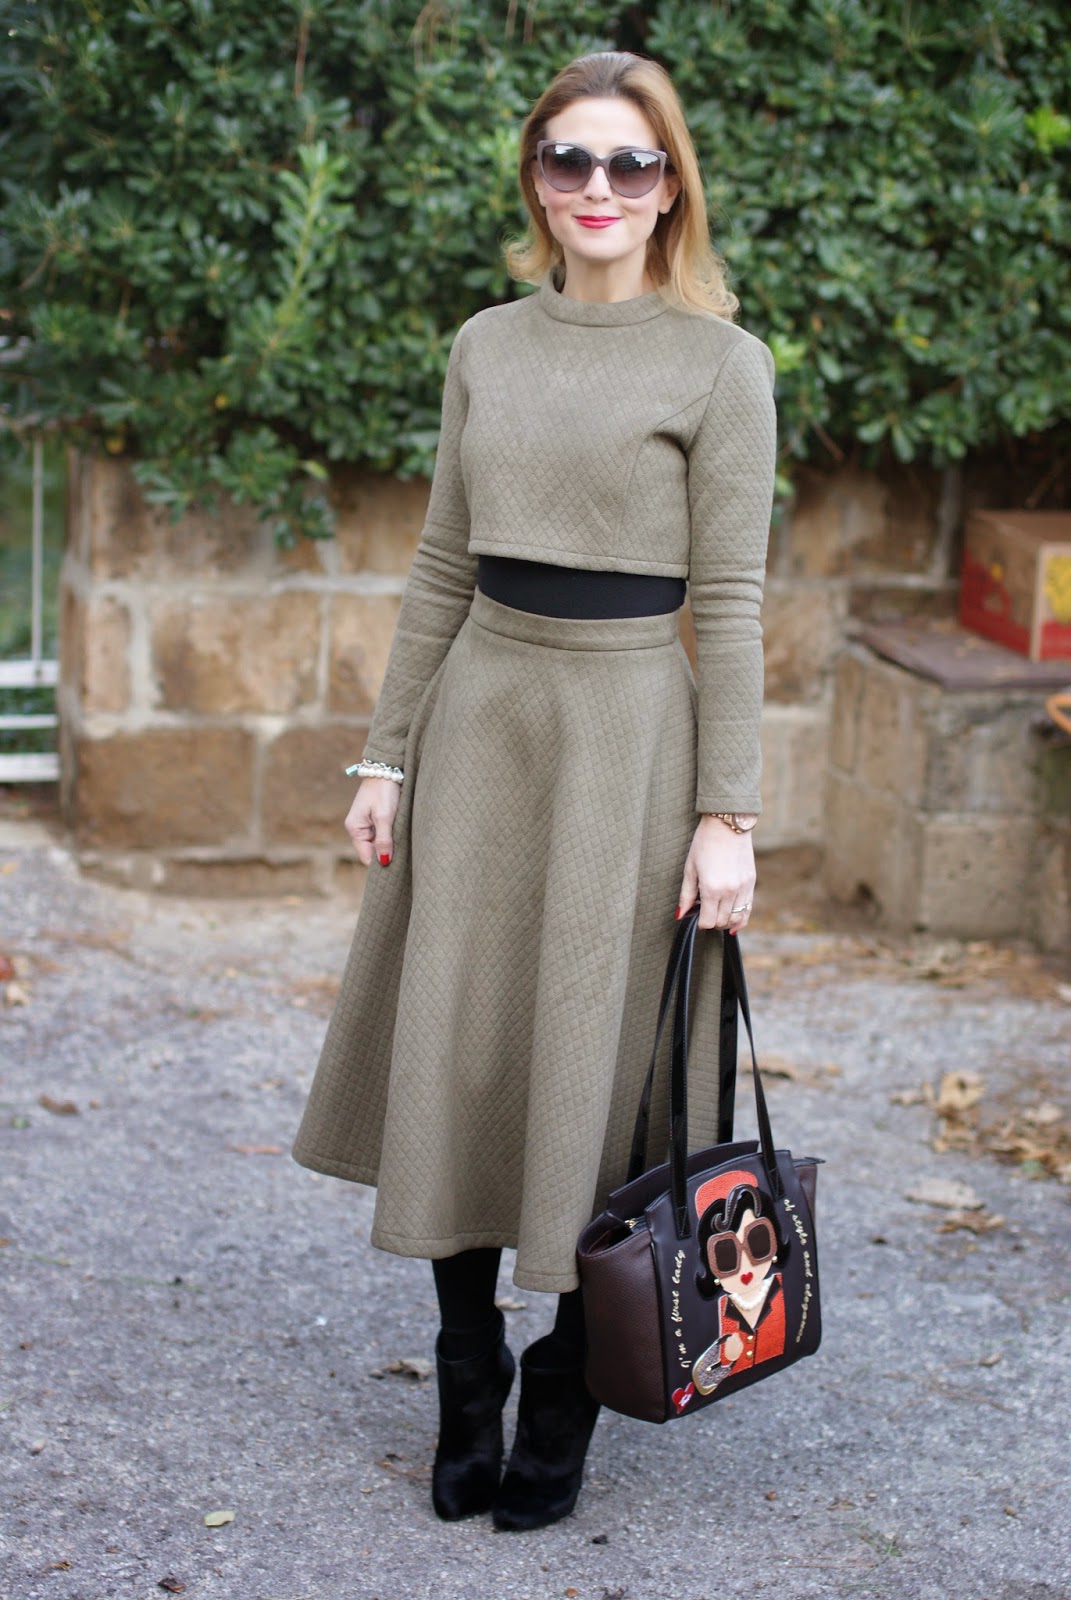 Quilted crop top and midi skirt, Braccialini Jackie Kennedy bag, Le Silla ankle boots, Fashion and Cookies, fashion blogger